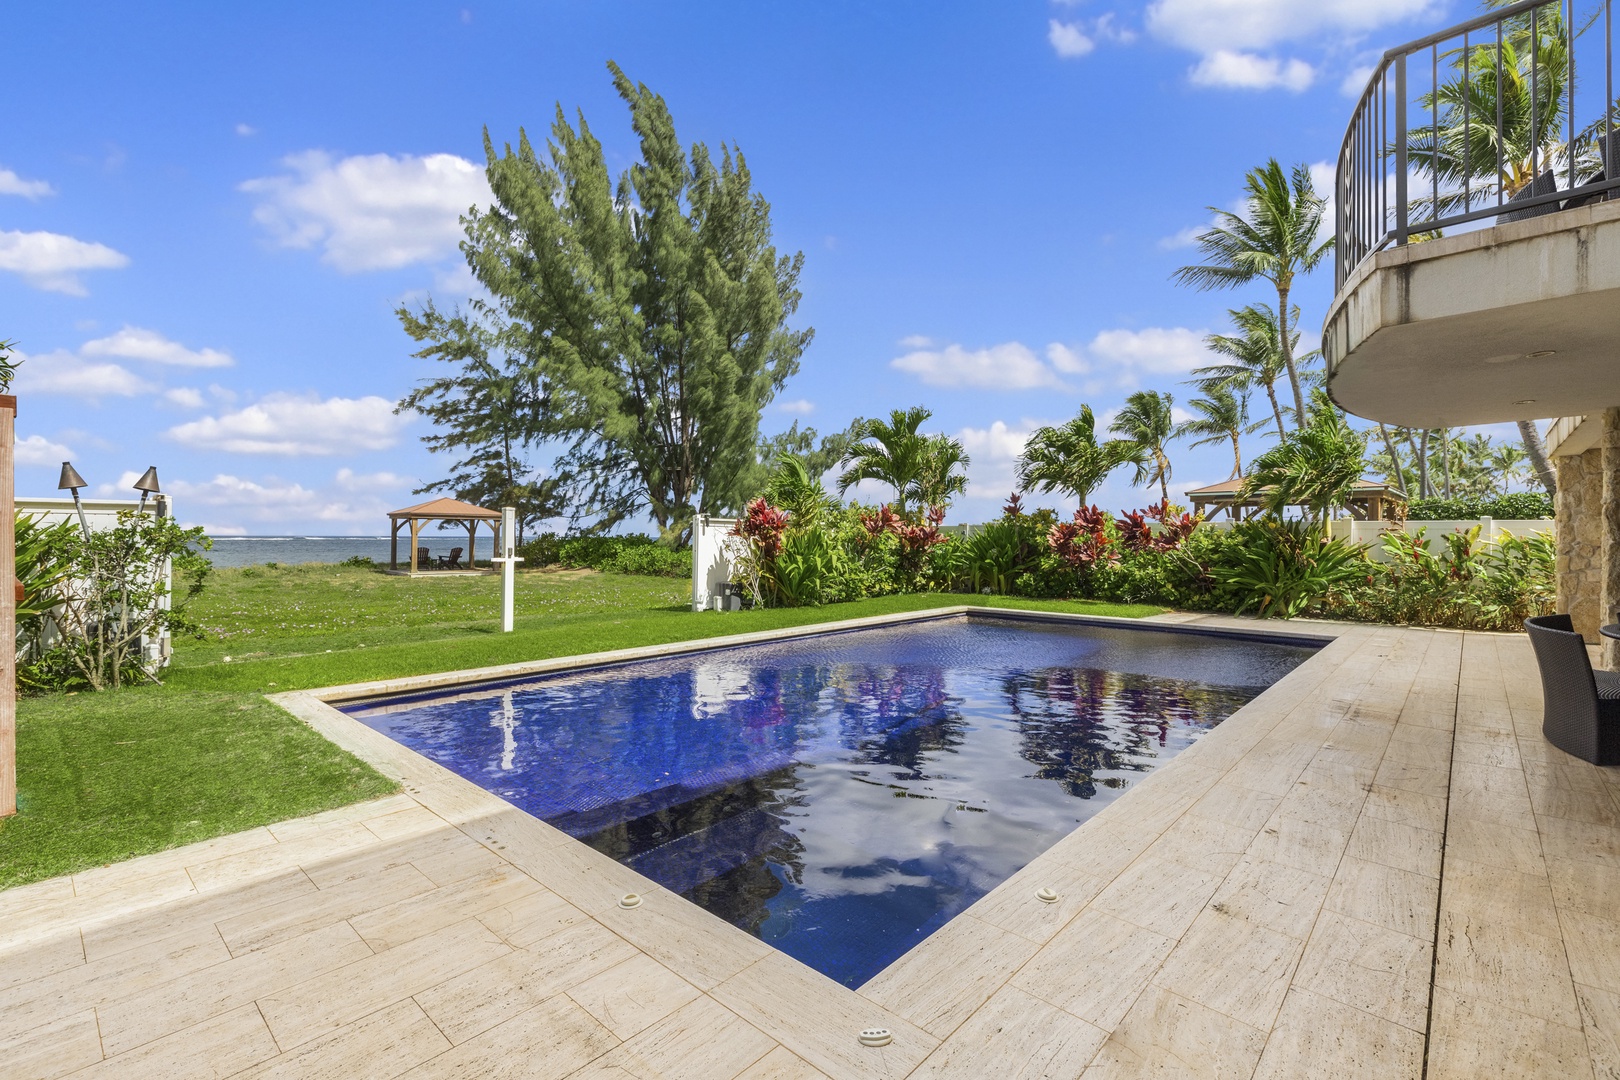 Waialua Vacation Rentals, Kala'iku Estate - Relax and unwind in this tropical oasis featuring a stunning pool that offers a picturesque backdrop of crystal clear ocean and lush greenery